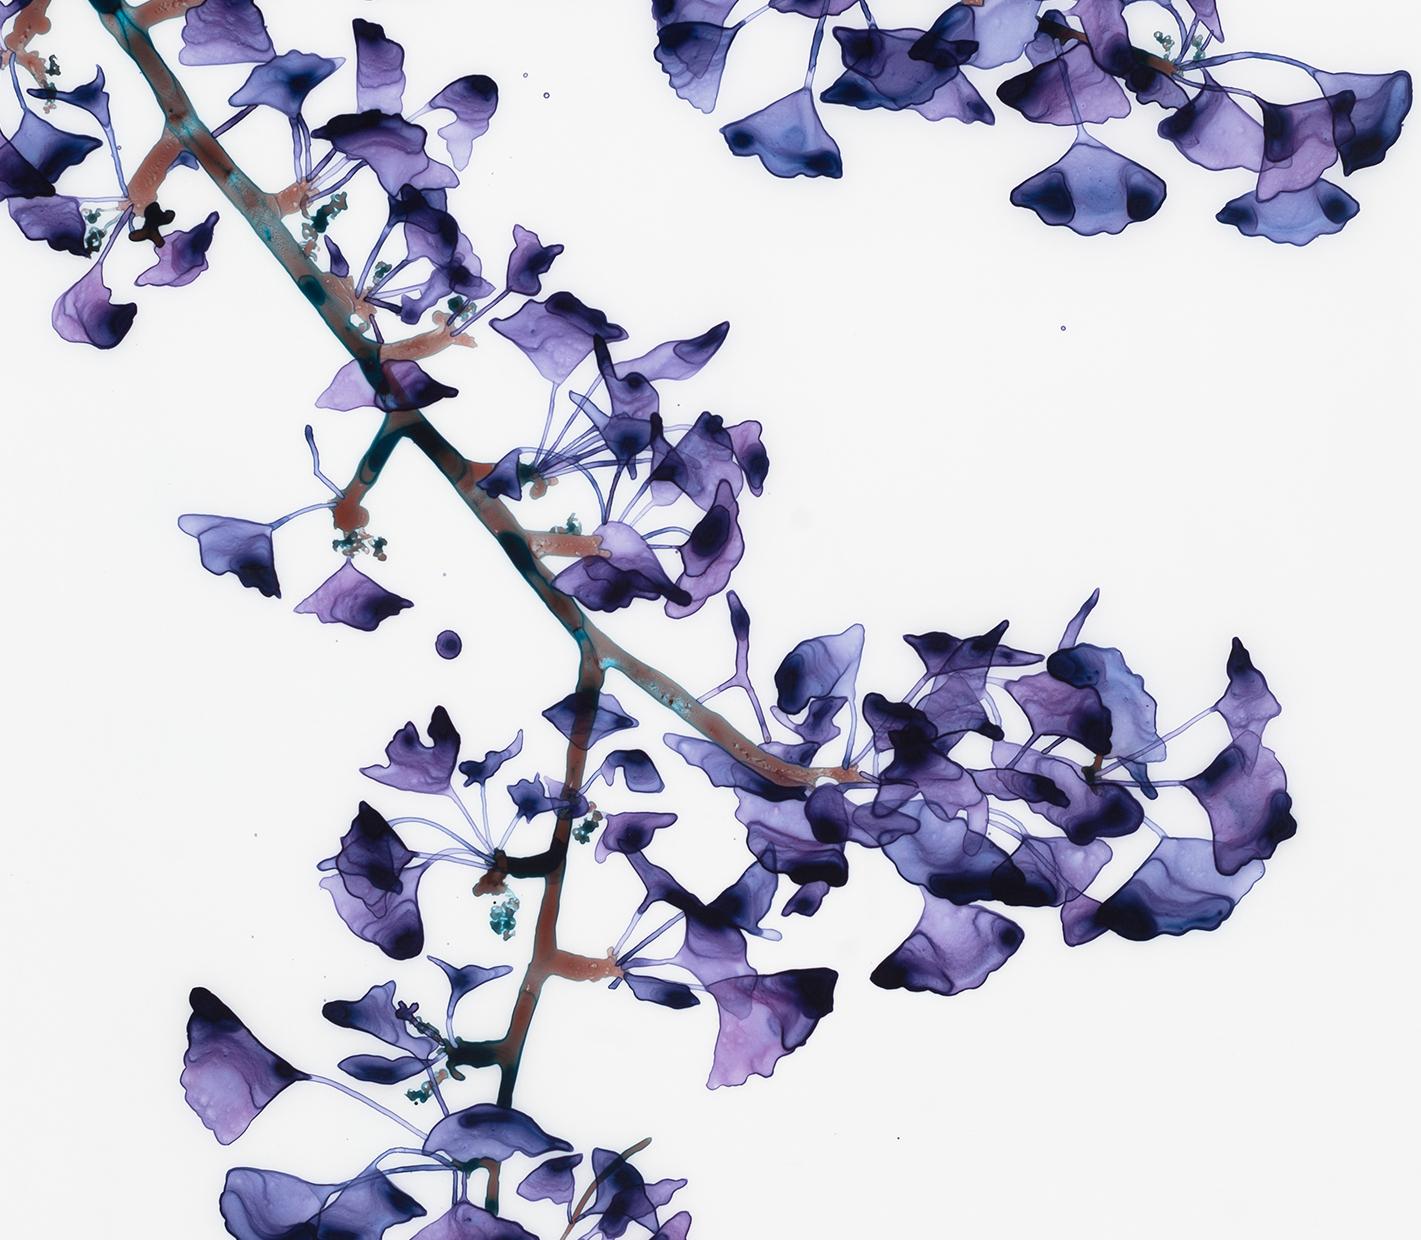 Gingko leaves in deep hues of purple and lavender on delicate brown branches with hints of teal are striking against the pristine white background of this vertical painting in acrylic on Mylar. 

Battenfield's works on Mylar require mounting and